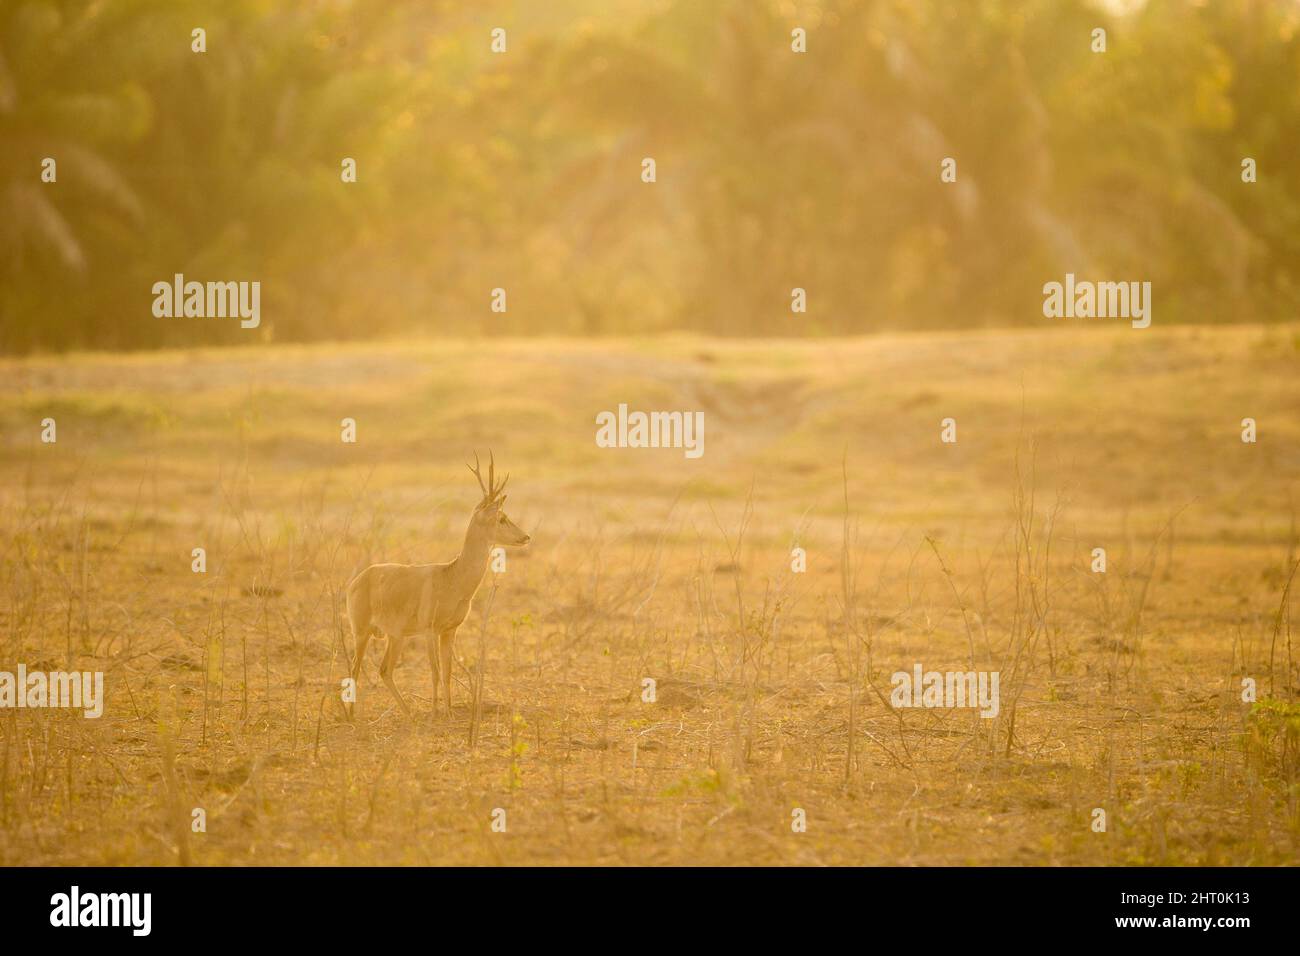 Pampas deer (Ozotoceros bezoarticus) alert in a misty clearing. Pantanal, Mato Grosso, Brazil Stock Photo